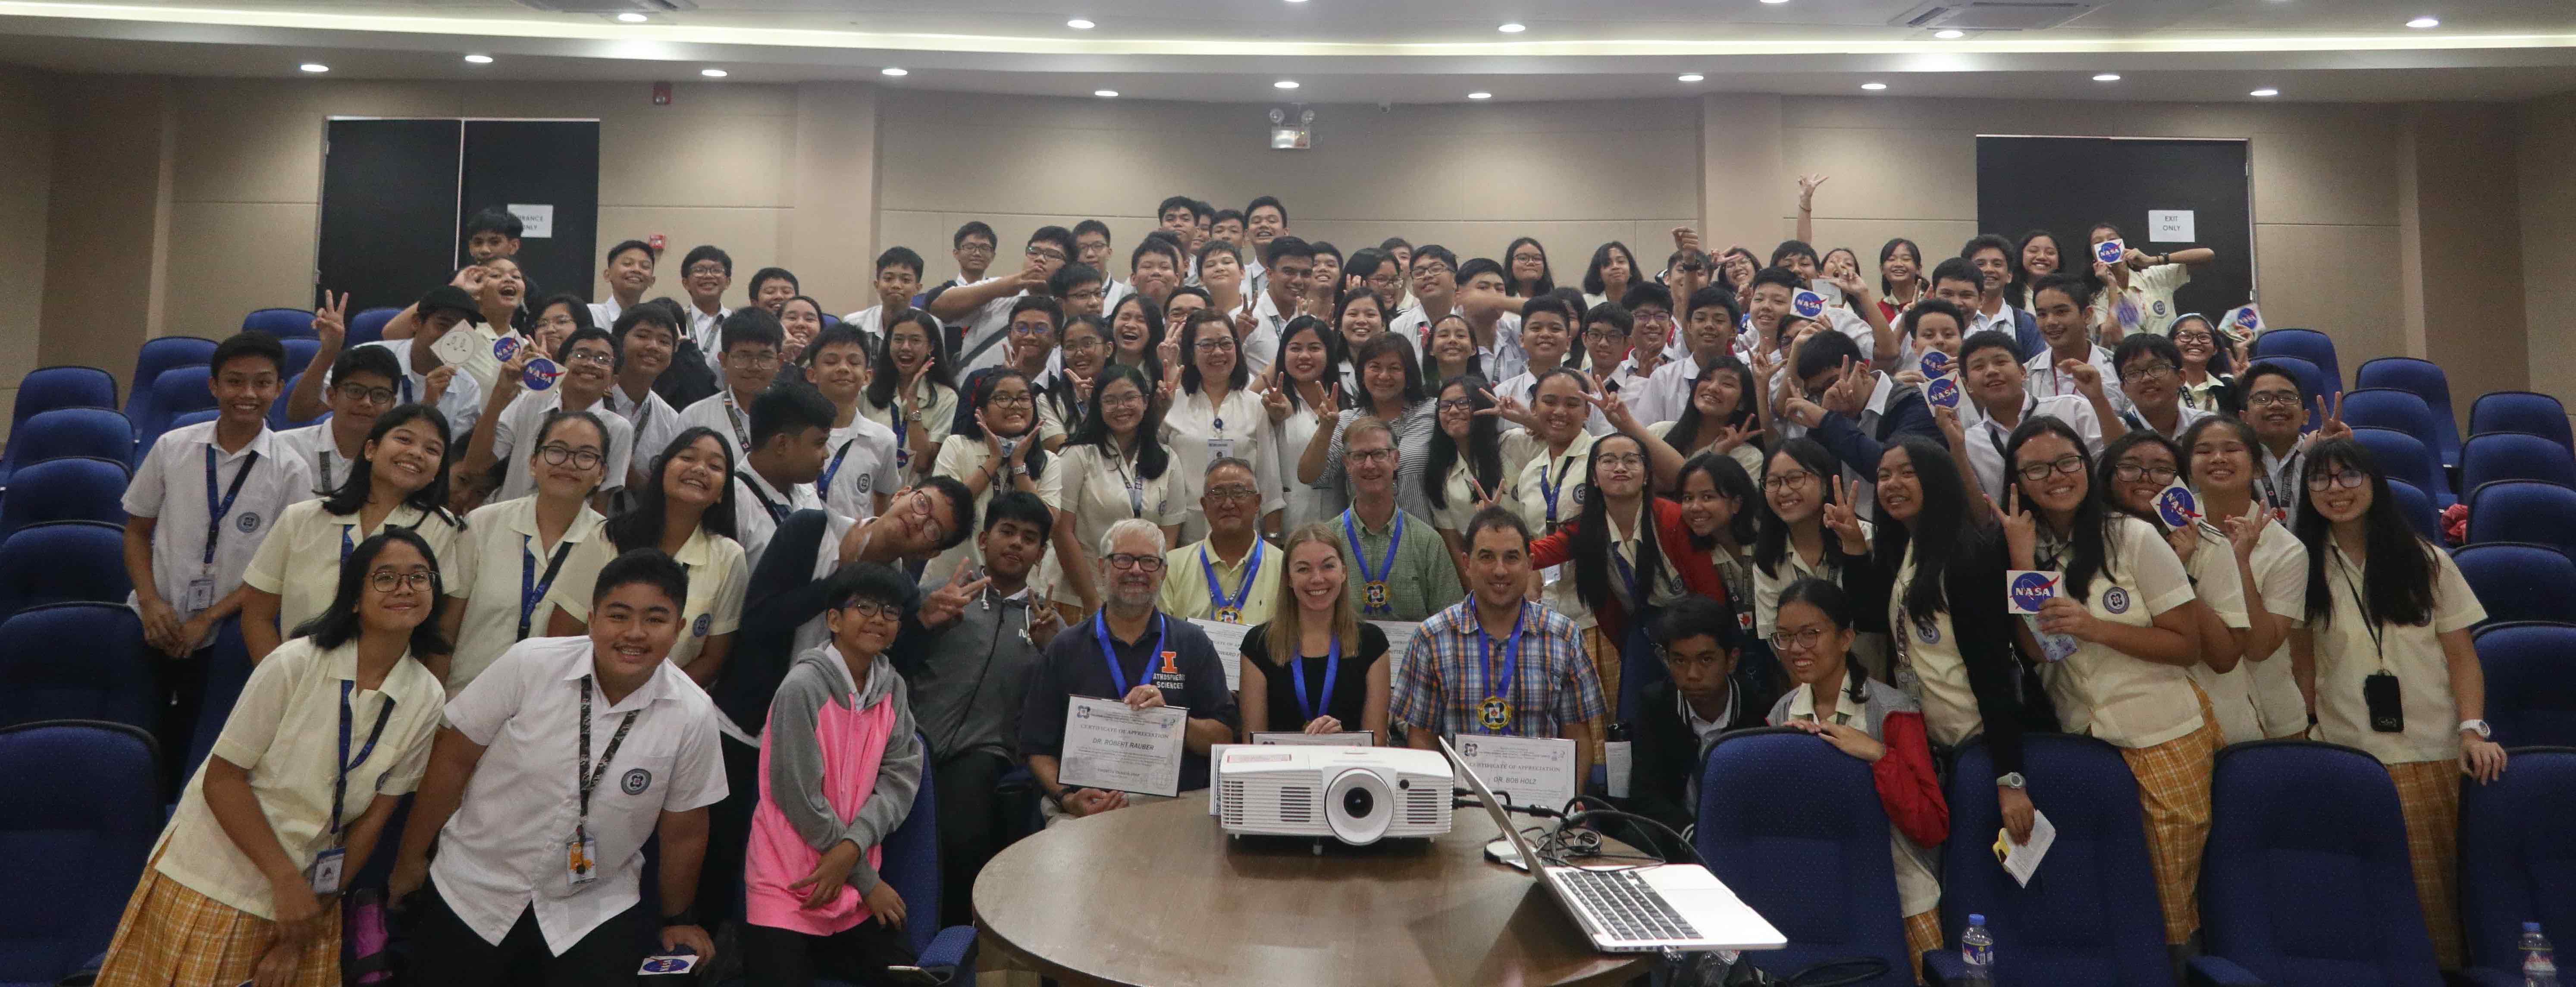 8th grade students from the Philippine Science High School Central Luzon Campus pose with the CAMP2Ex team (center) after a presentation about NASA Earth Science and CAMP2Ex at their school on 09 September 2019.